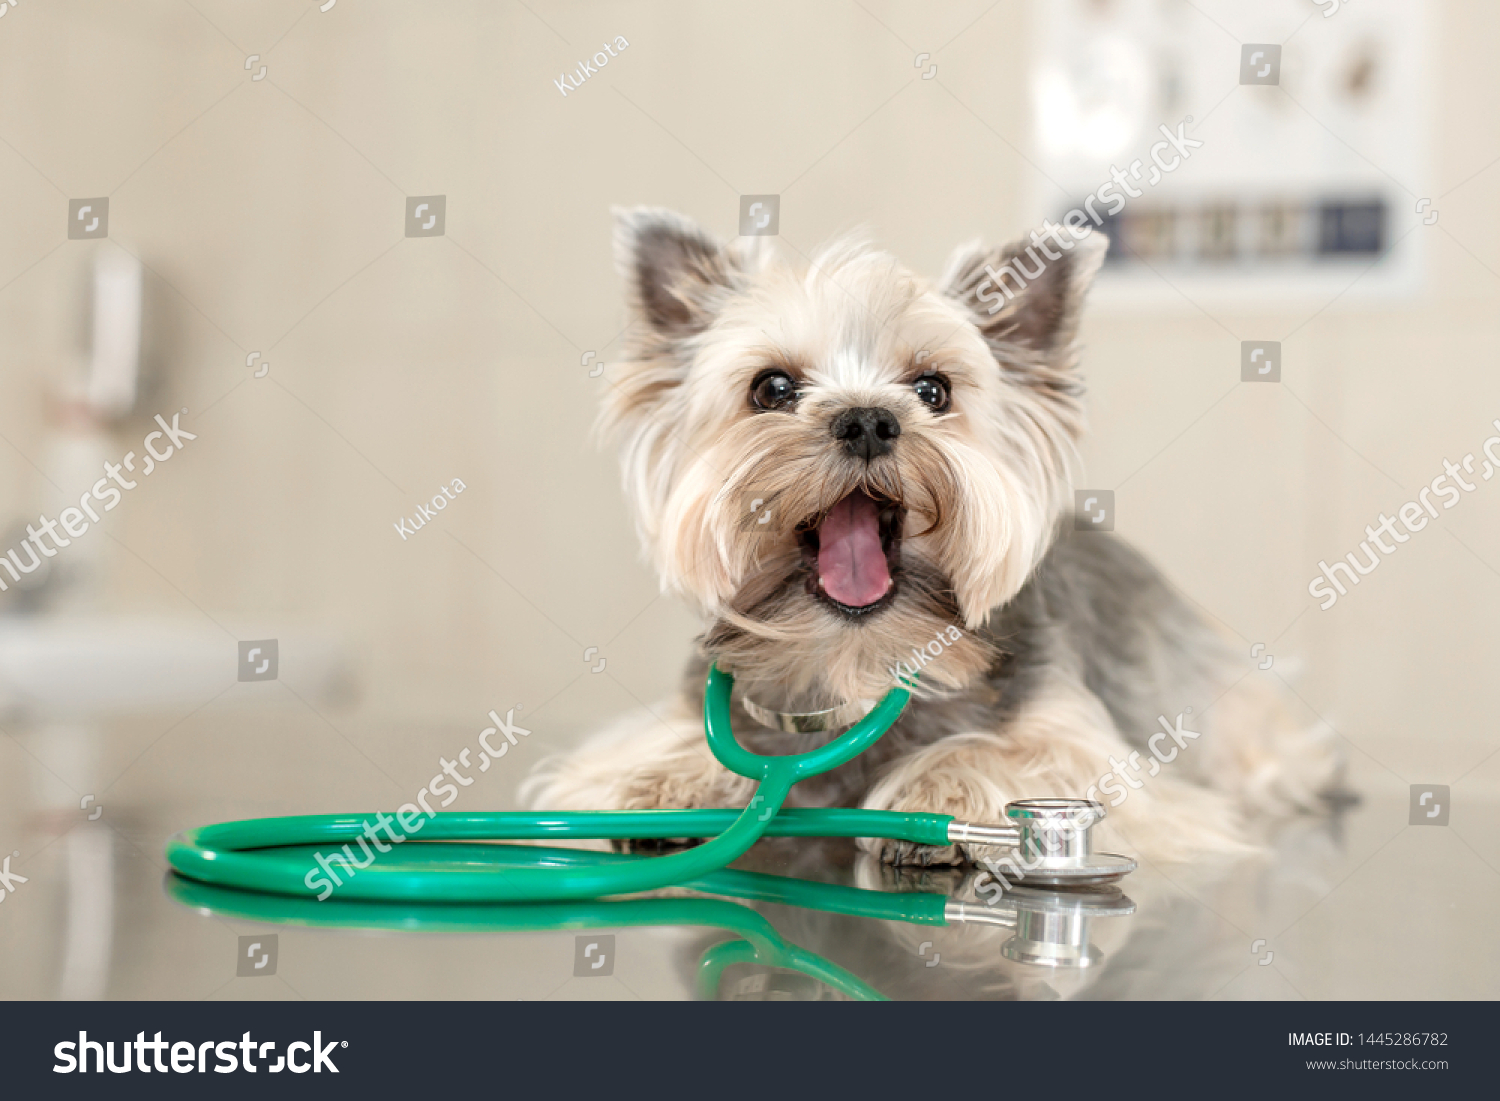 A cute dog breed Yorkshire Terrier is lying on the table with a stethoscope in a veterinary clinic.
Inspection in a veterinary clinic. Happy dog vet. Dog grimaces and shows tongue close-up. #1445286782